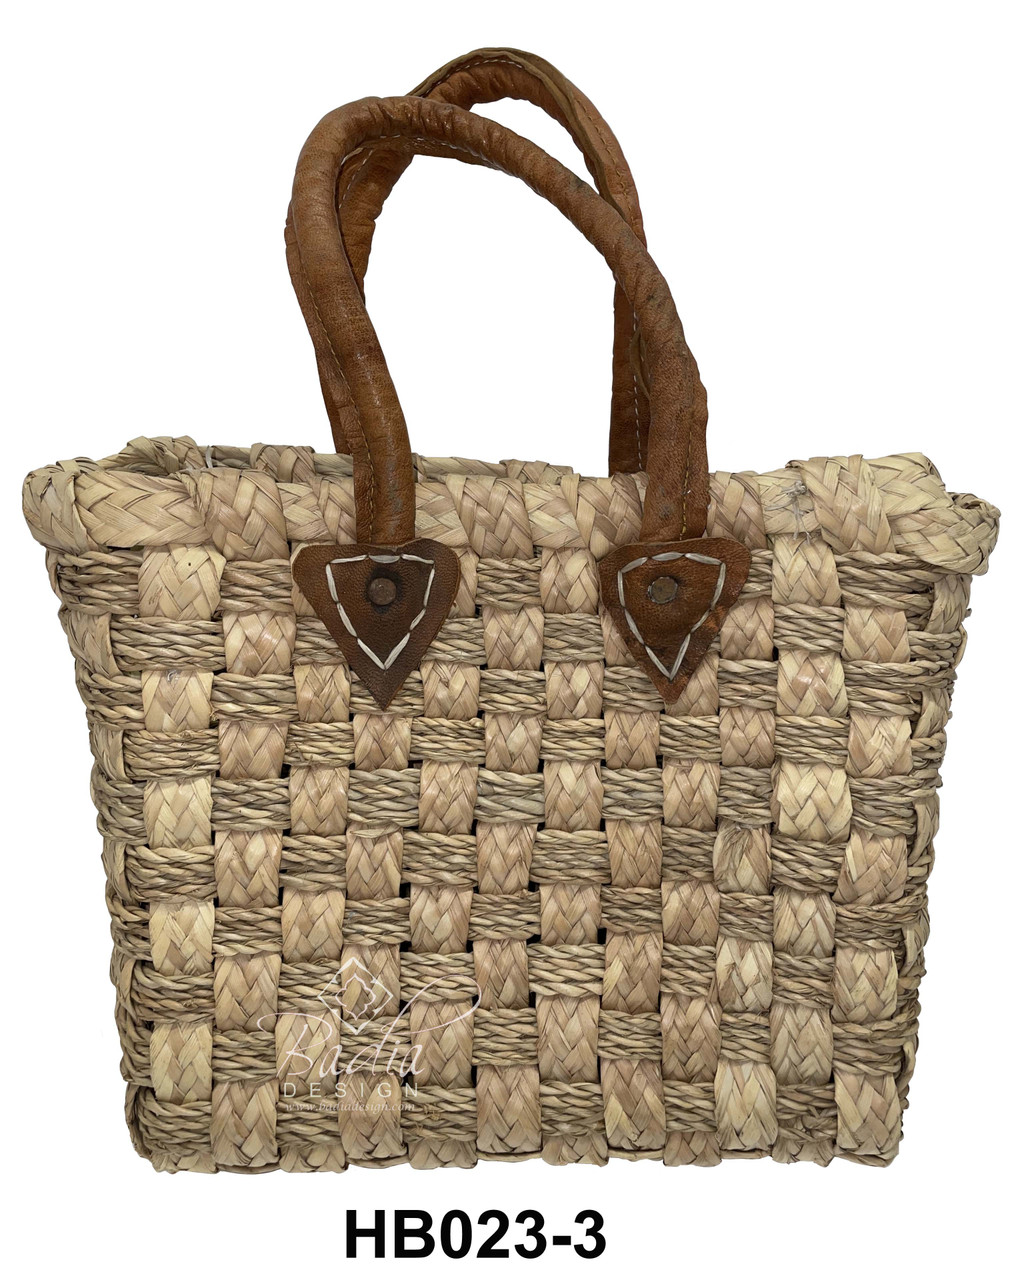 Natural Color Handwoven Straw Handbag with Leather Handle - HB023